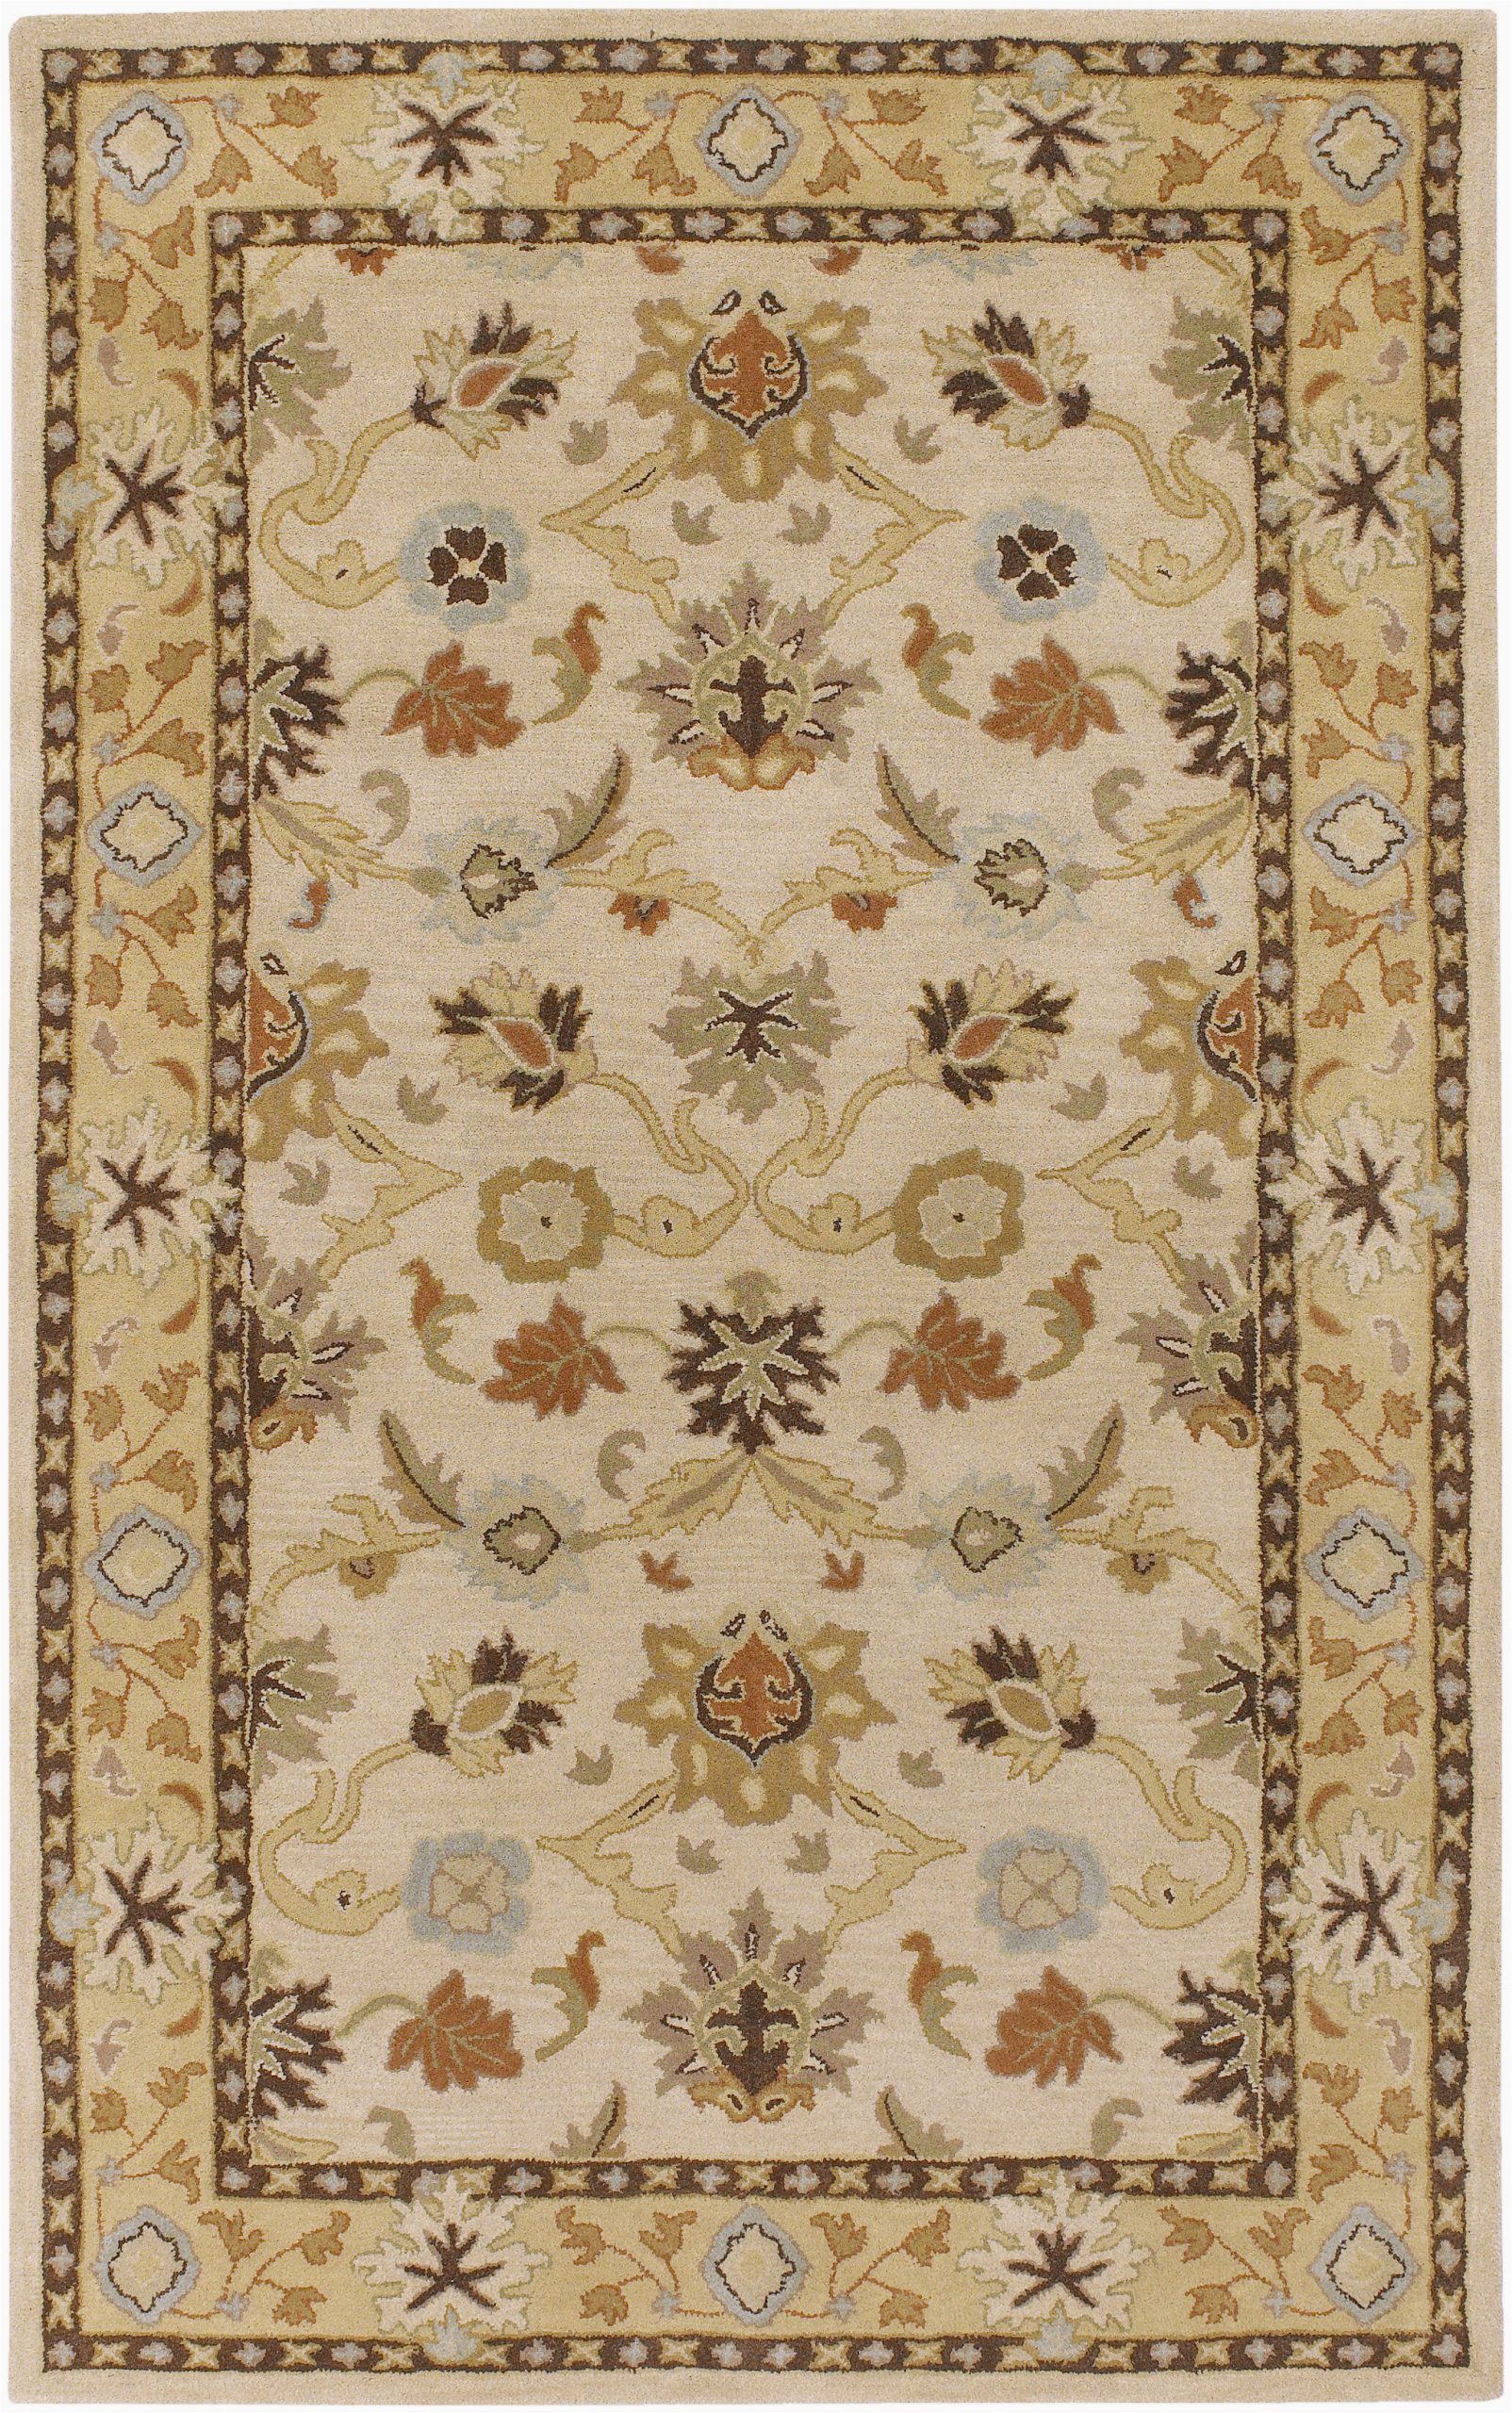 keefer floral handmade tufted wool bei an area rug